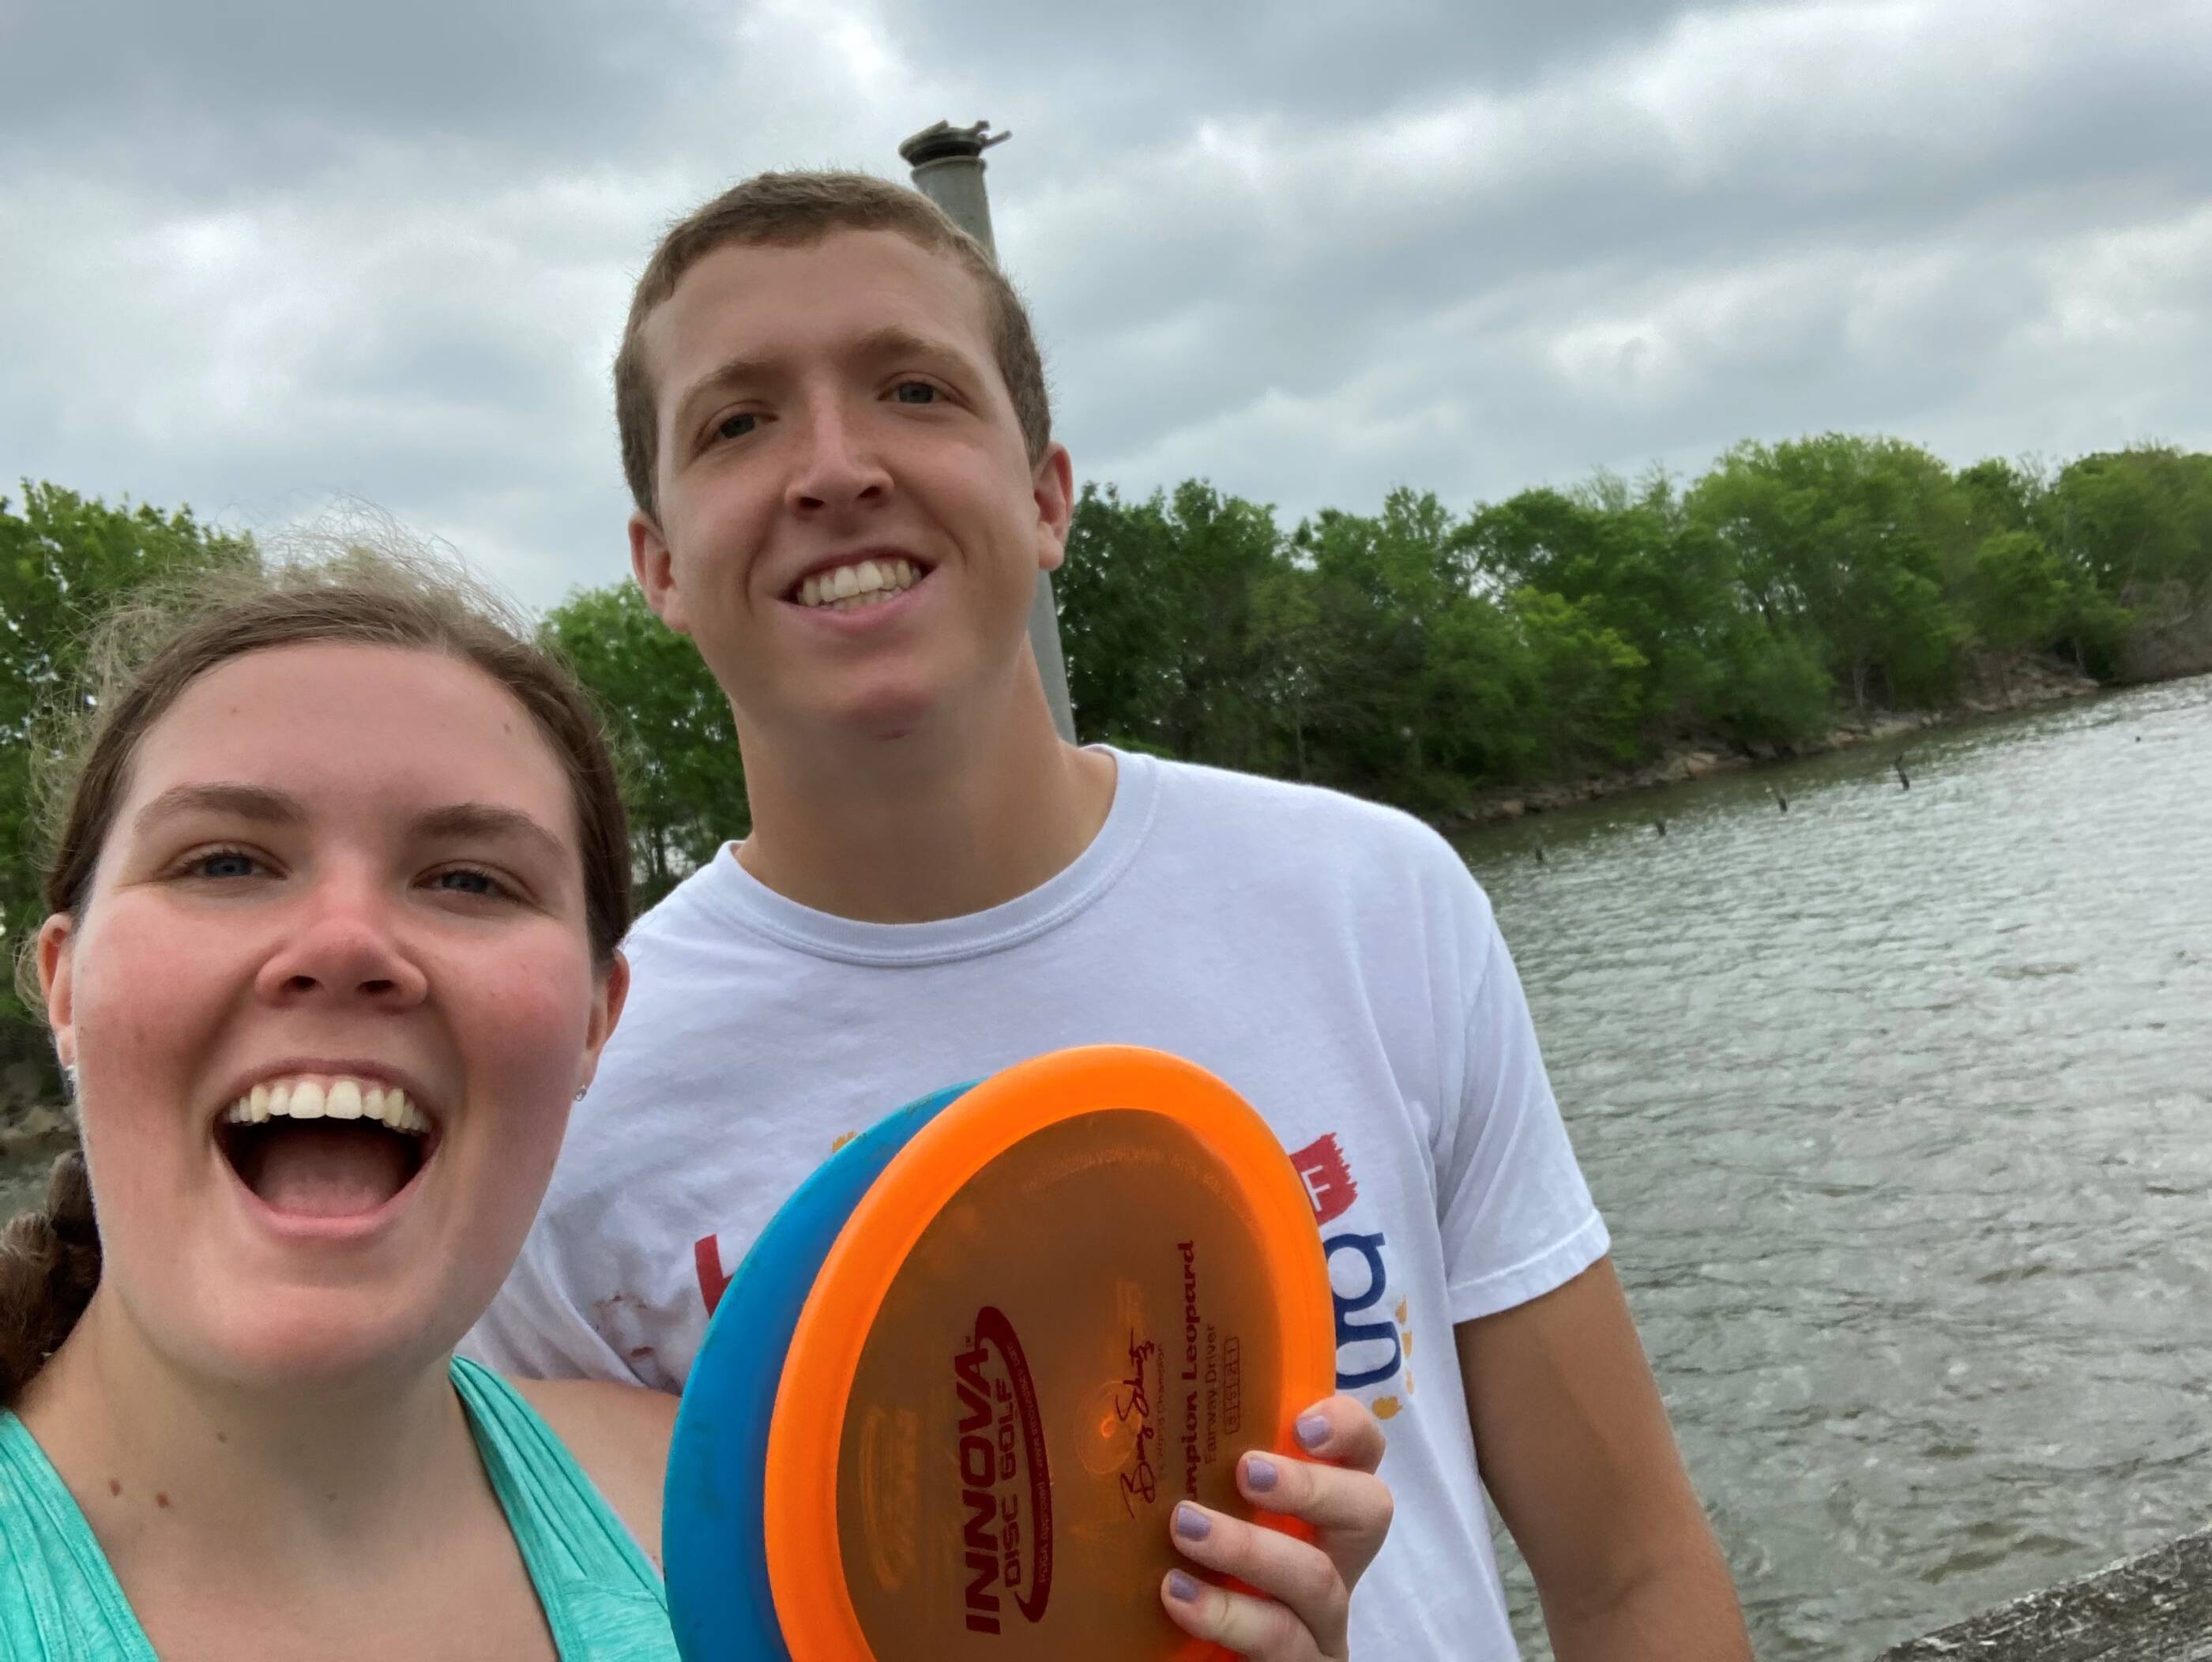 Matthew and his girlfriend playing disc golf. Objects like these often cannot be recycled through traditional methods, but can be processed via advanced recycling.